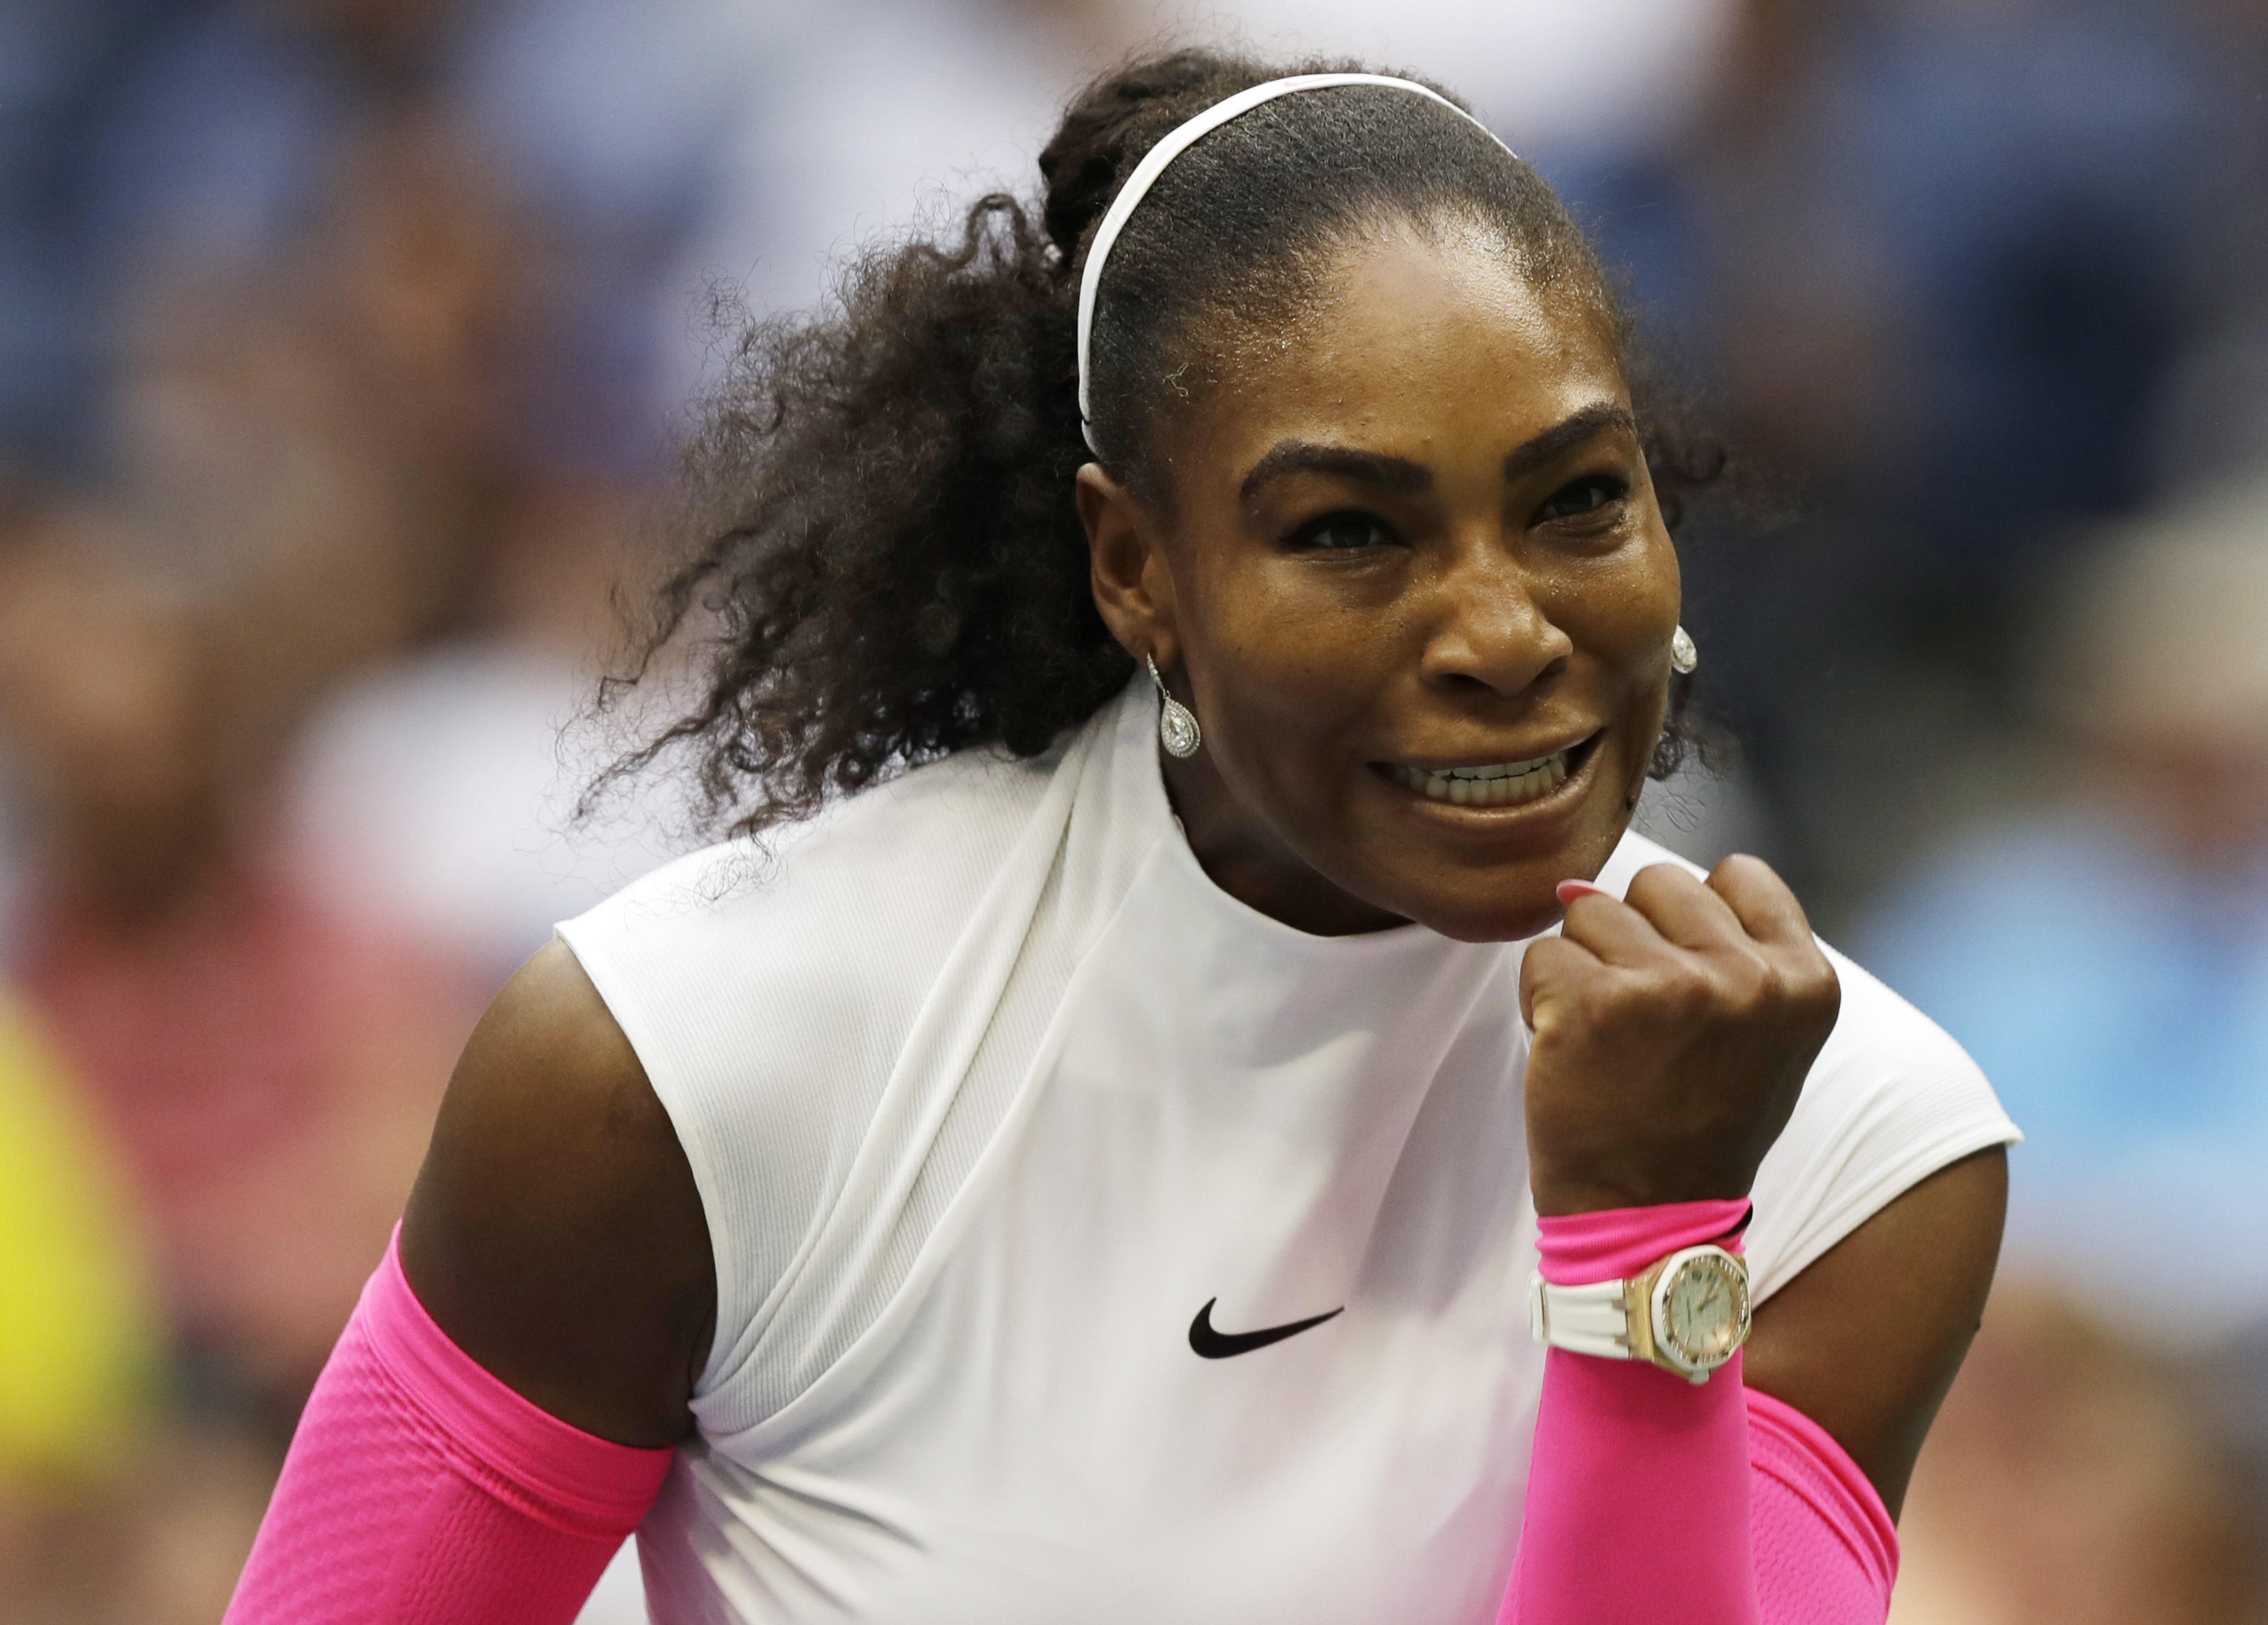 Serena Williams - The rise of tennis superstar Serena Williams - Pictures - CBS News